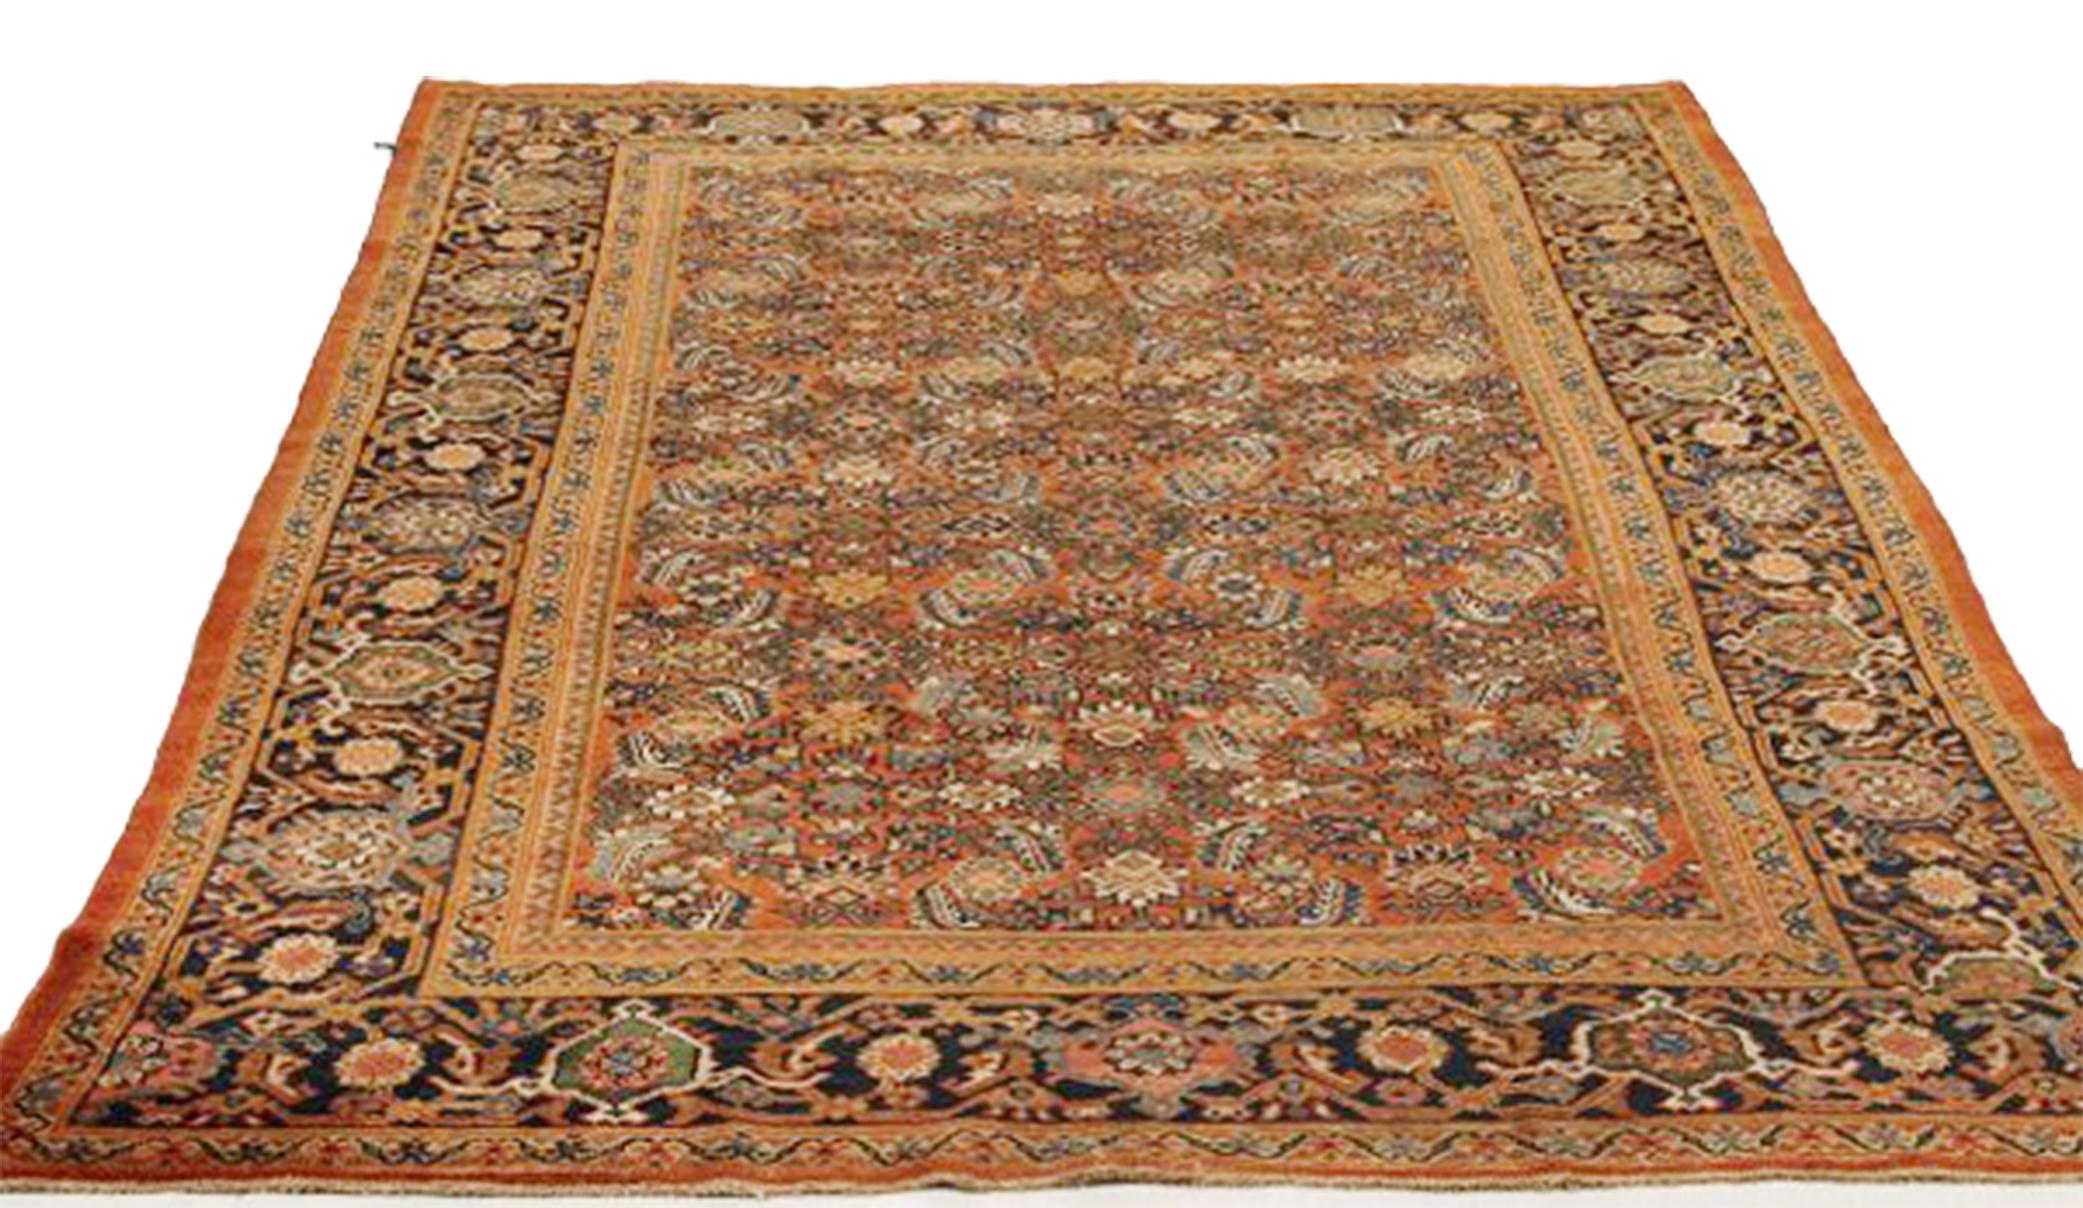 Antique handmade Persian area rug from high-quality sheep’s wool and colored with eco-friendly vegetable dyes that are proven safe for humans and pets alike. It’s a Classic Sultanabad design showcasing an orange and beige field with prominent navy,